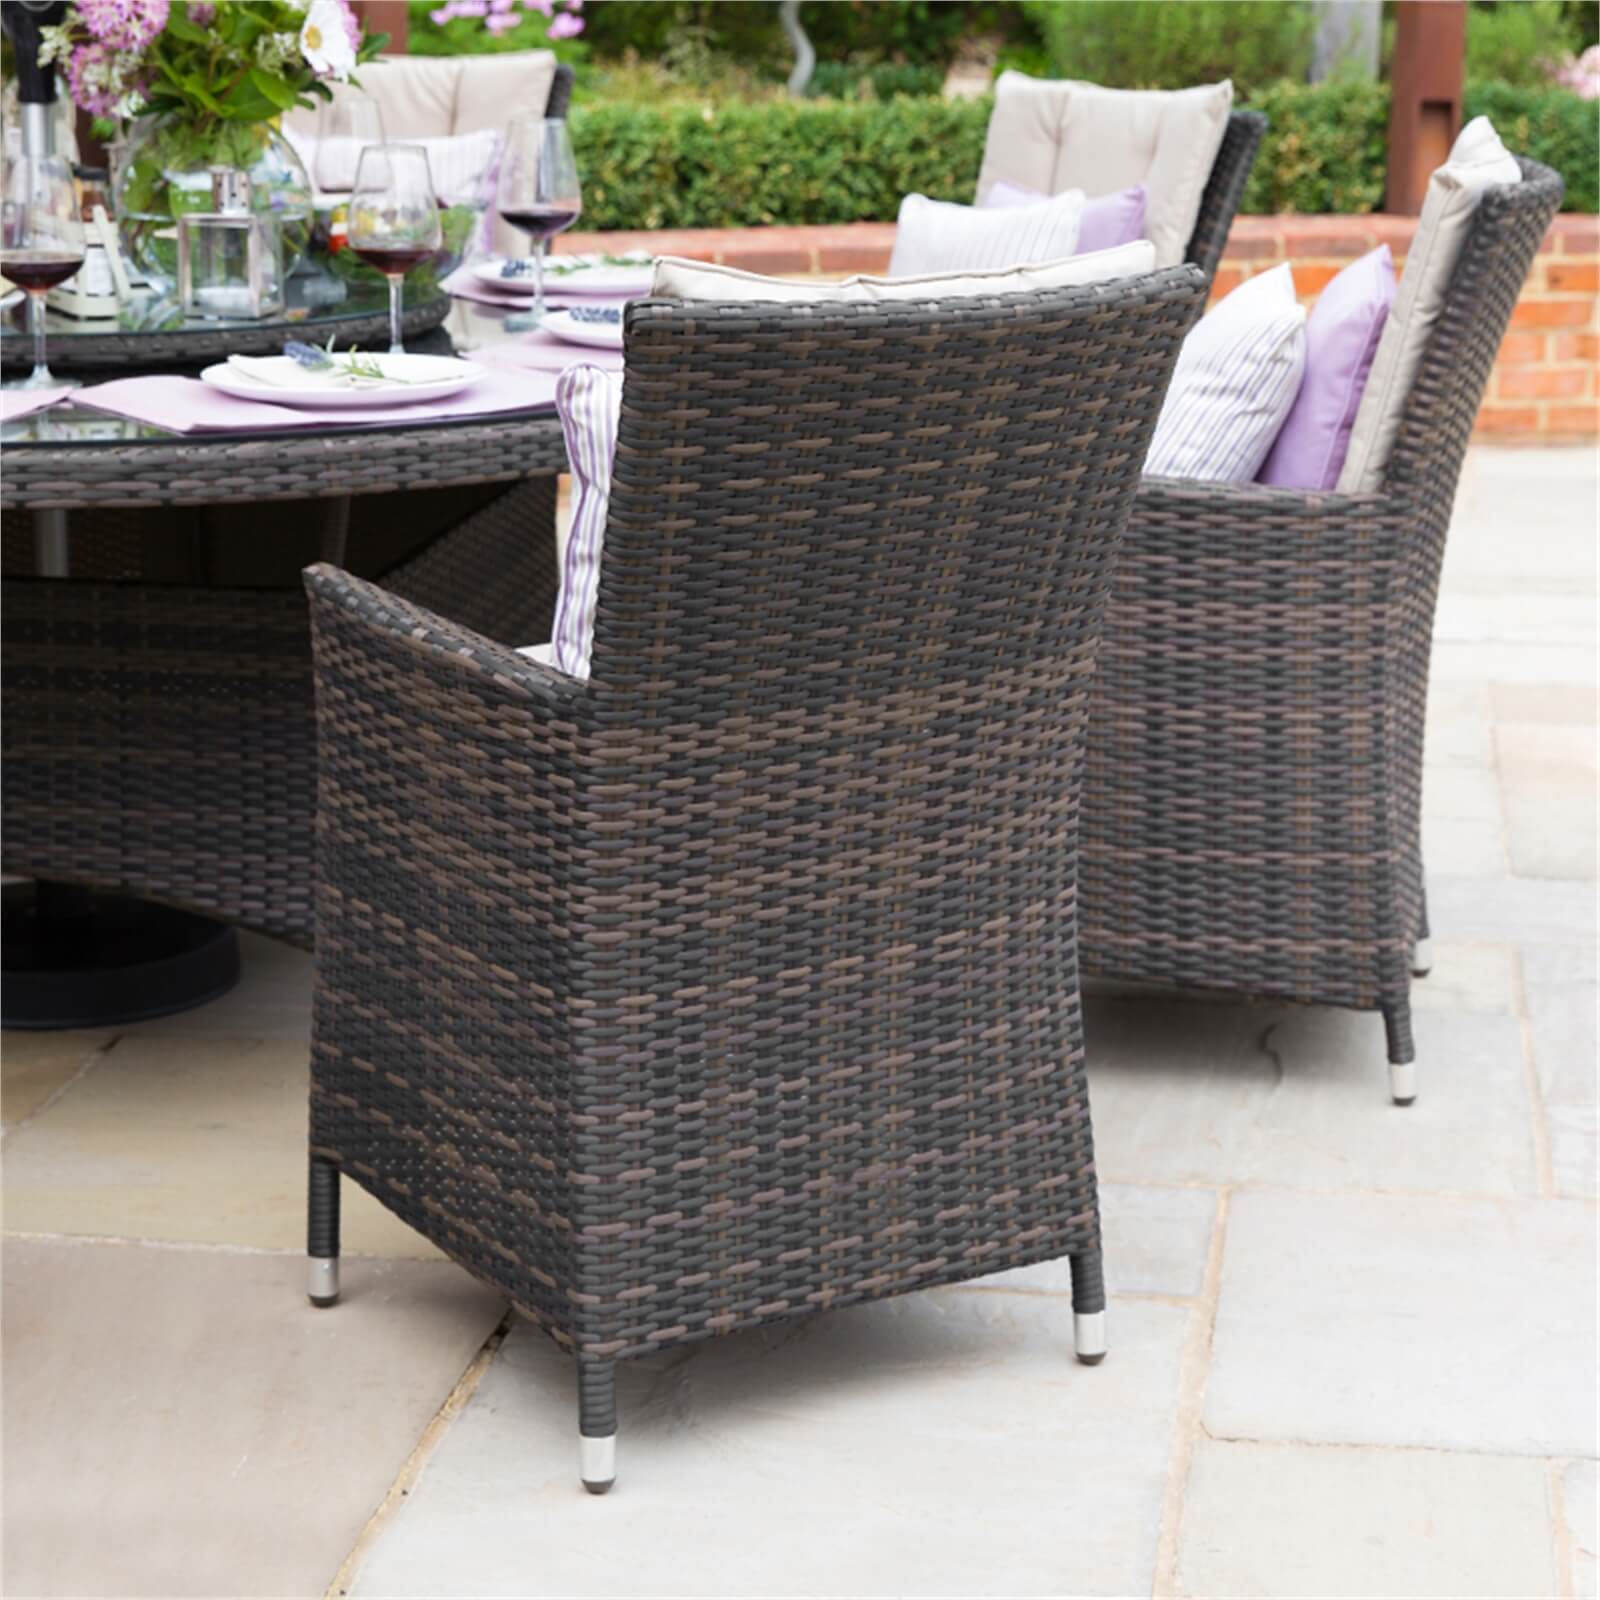 Nova Florence Rattan 6 Seater Round Dining Set in Brown